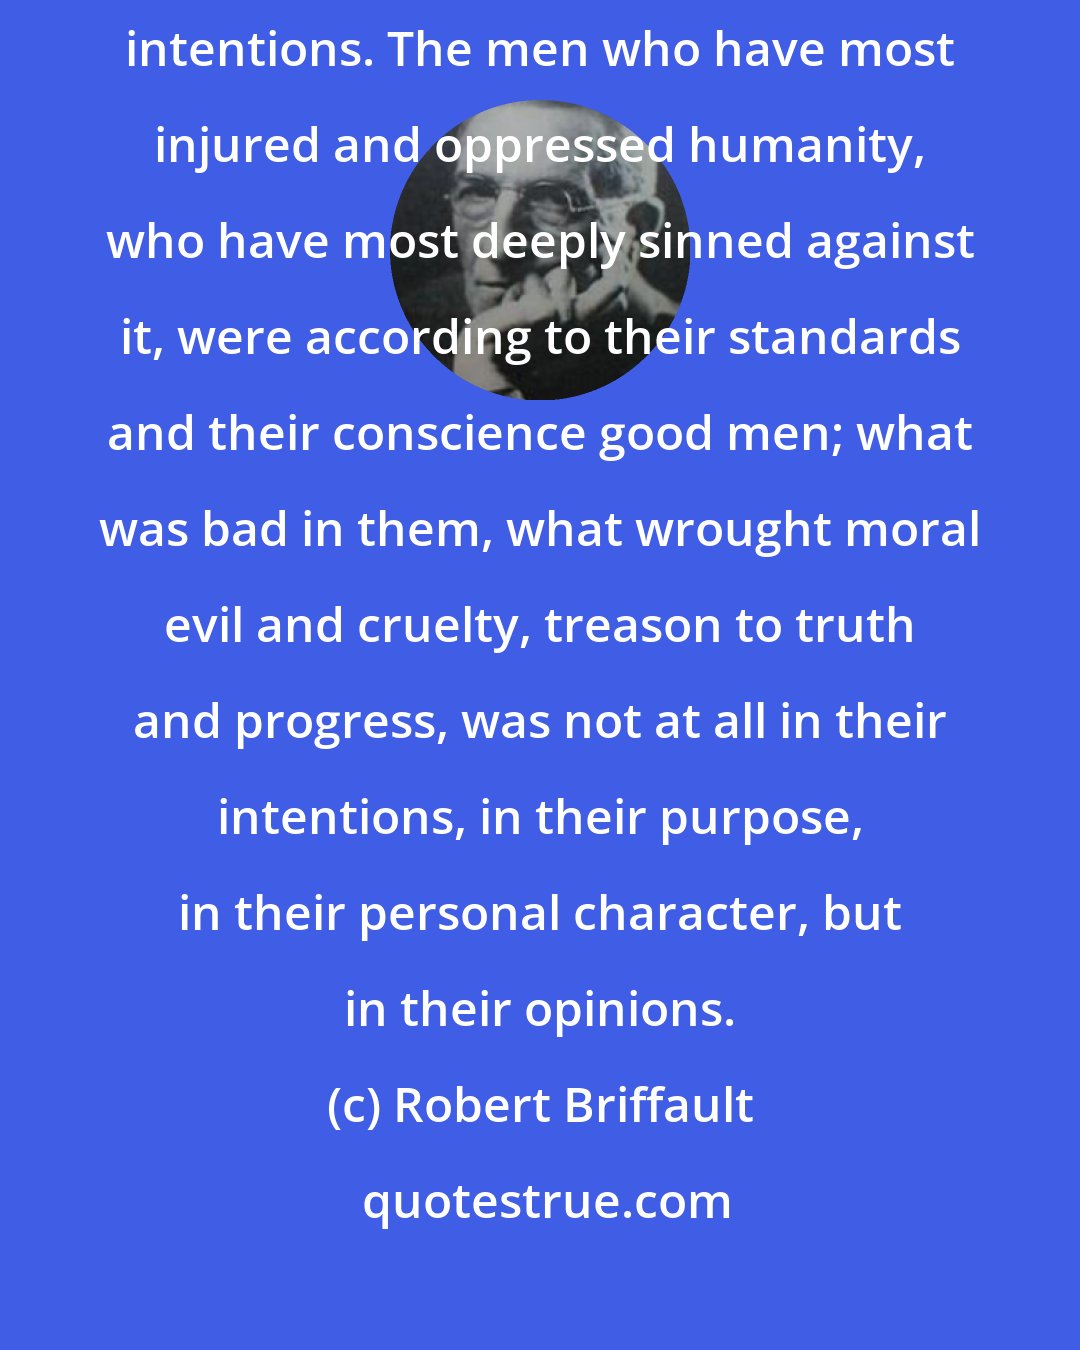 Robert Briffault: The hell of human suffering, evil and oppression is paved with good intentions. The men who have most injured and oppressed humanity, who have most deeply sinned against it, were according to their standards and their conscience good men; what was bad in them, what wrought moral evil and cruelty, treason to truth and progress, was not at all in their intentions, in their purpose, in their personal character, but in their opinions.